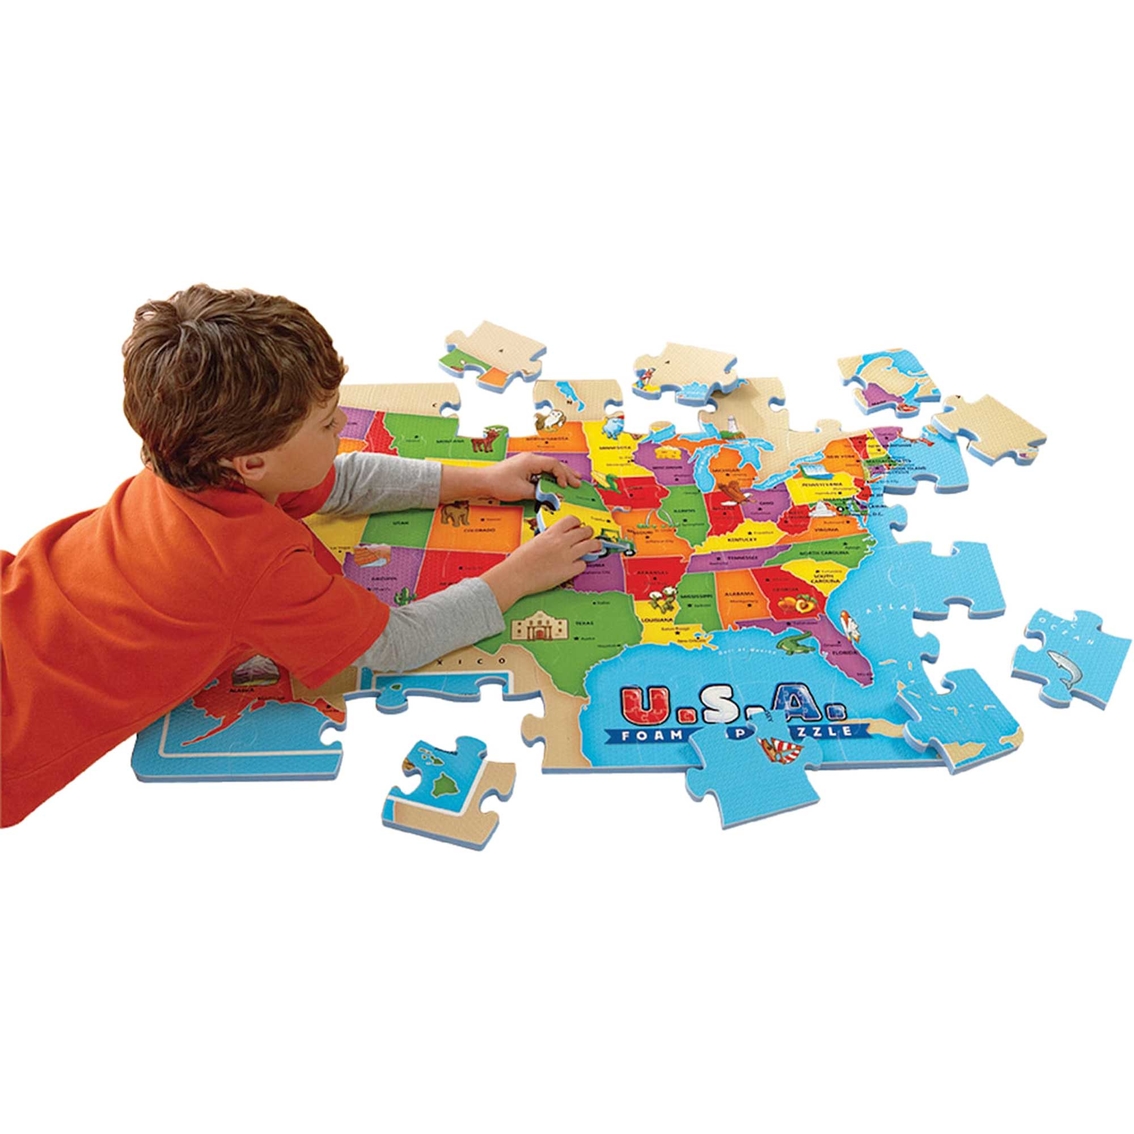 Learning Resources U.S.A. Foam Map Puzzle - Image 3 of 3